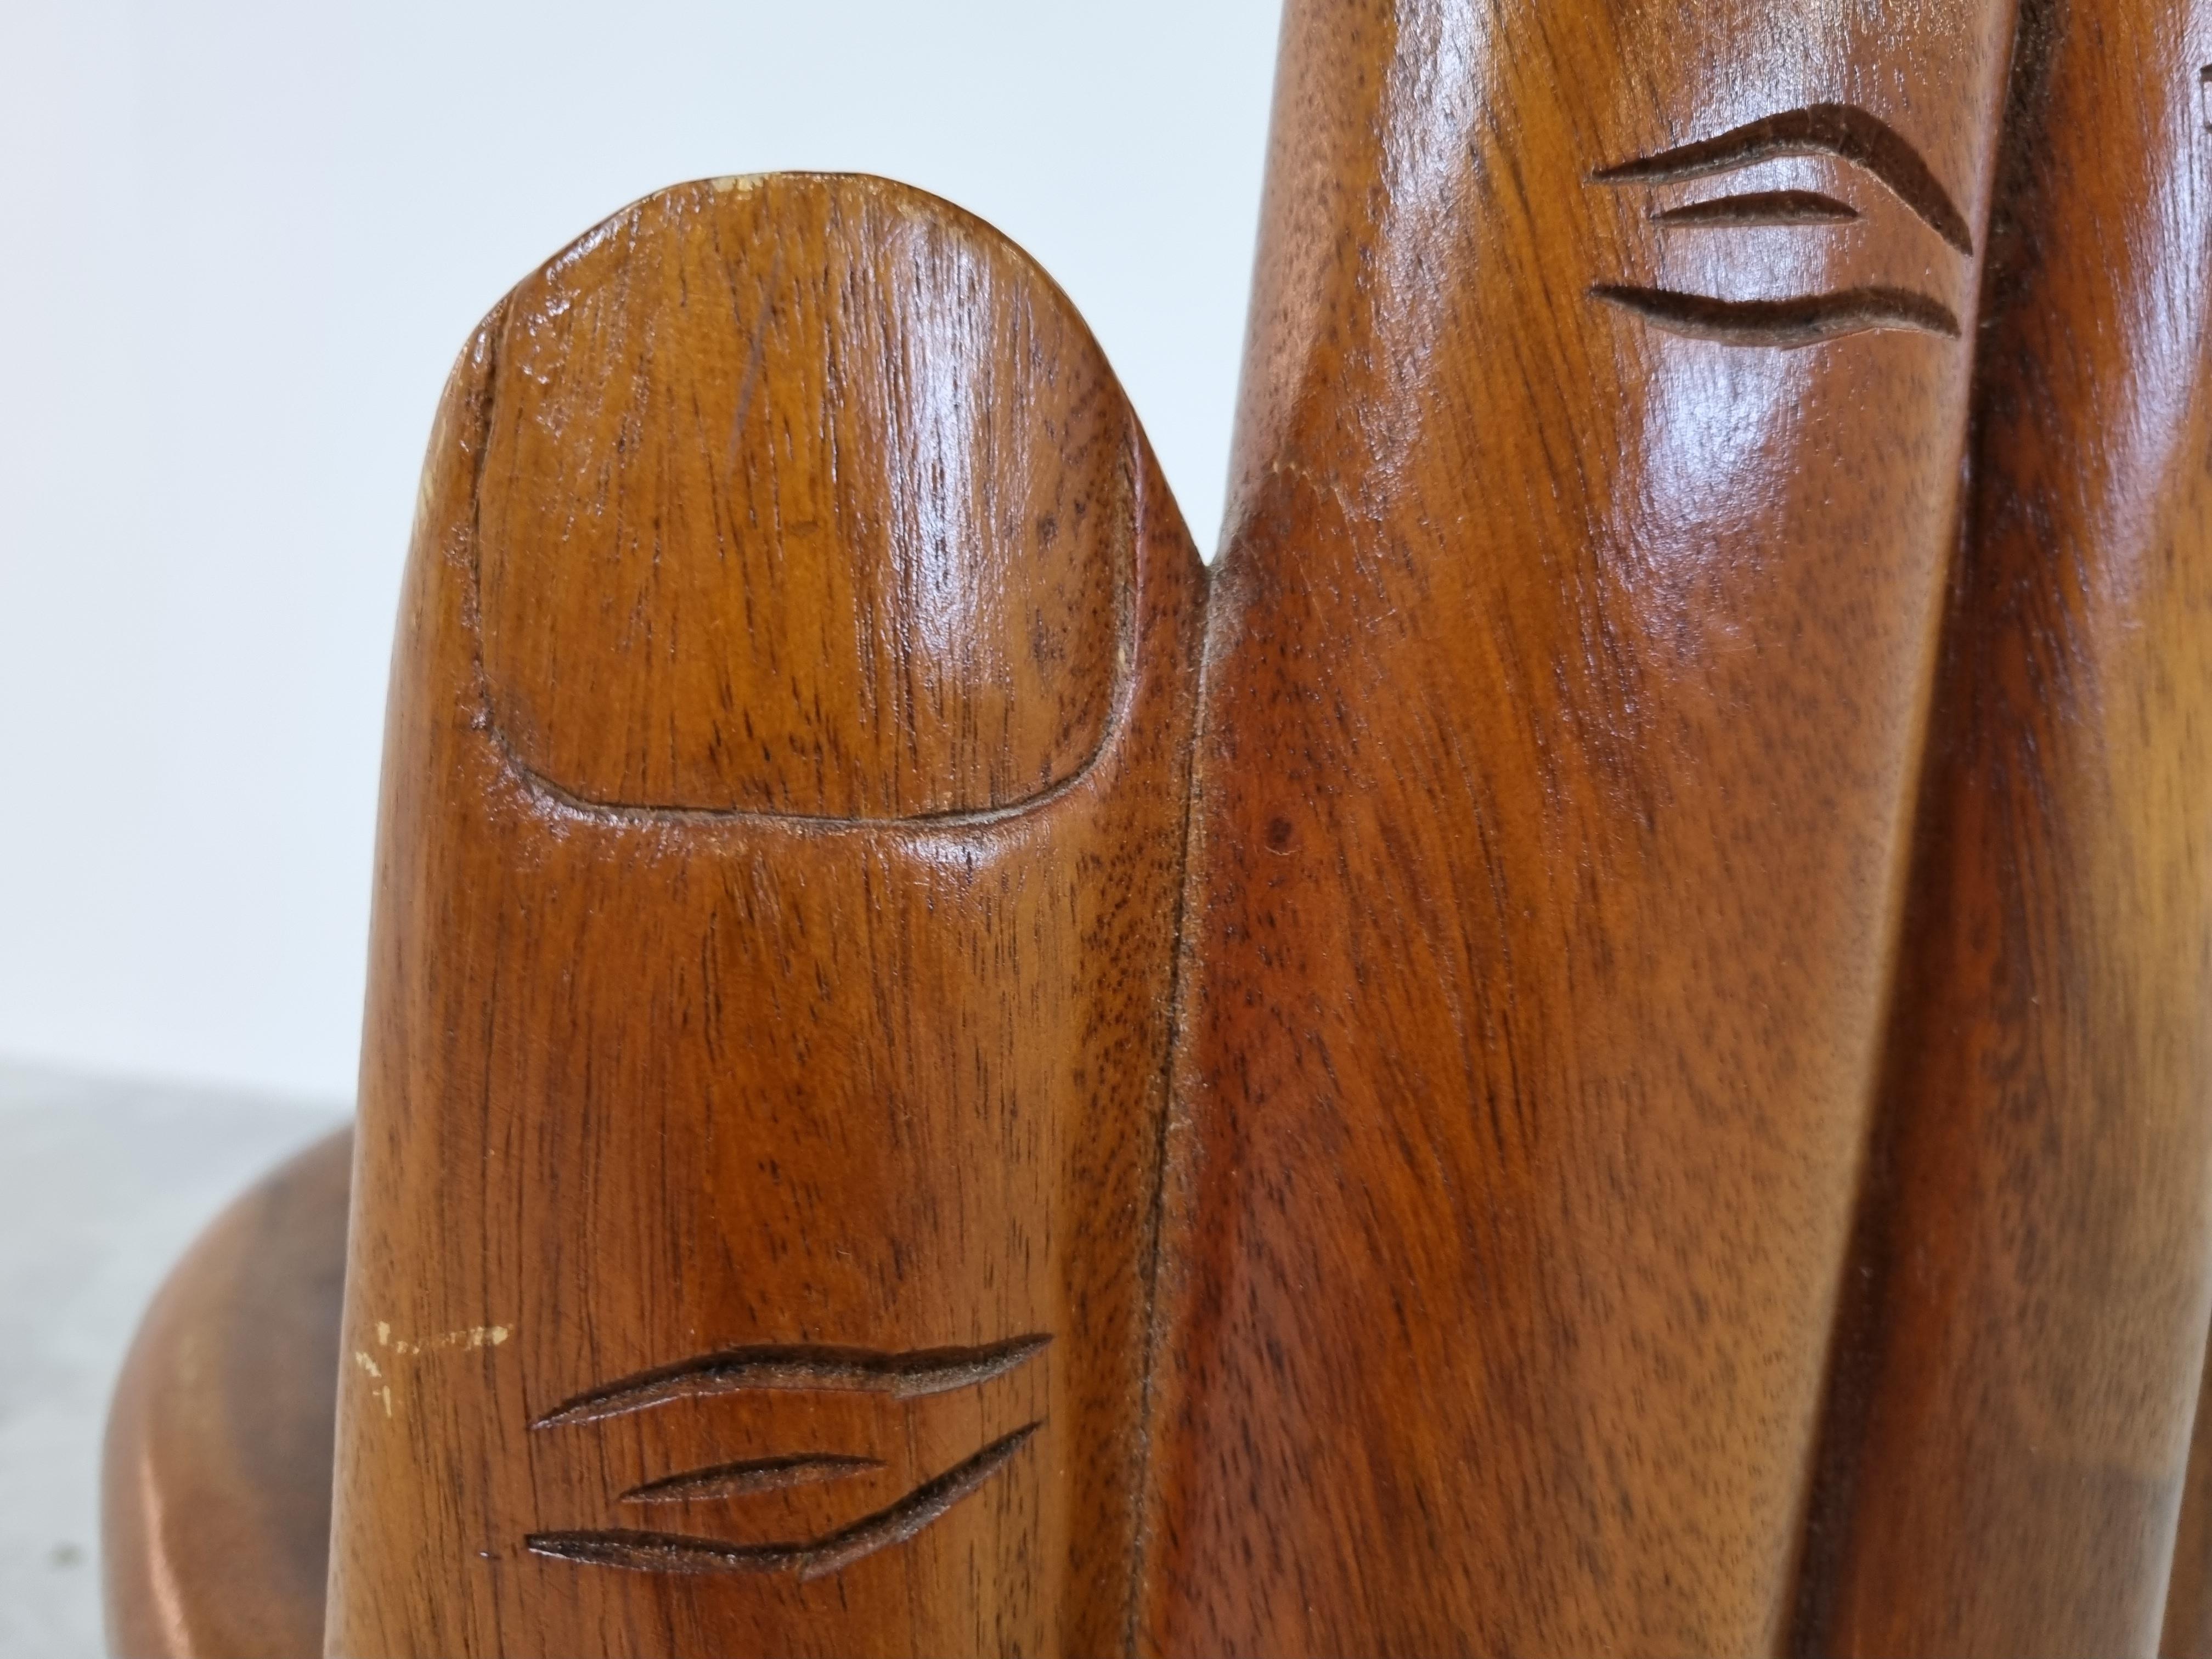 Vintage solid teak wooden sculpted hand chairs.

Beautifully made chairs, one chair has also wood carvings in it.

Very decorative as a pair.

1970s - Asia

Good overall condition

Dimensions:
Height: 93cm/36.61